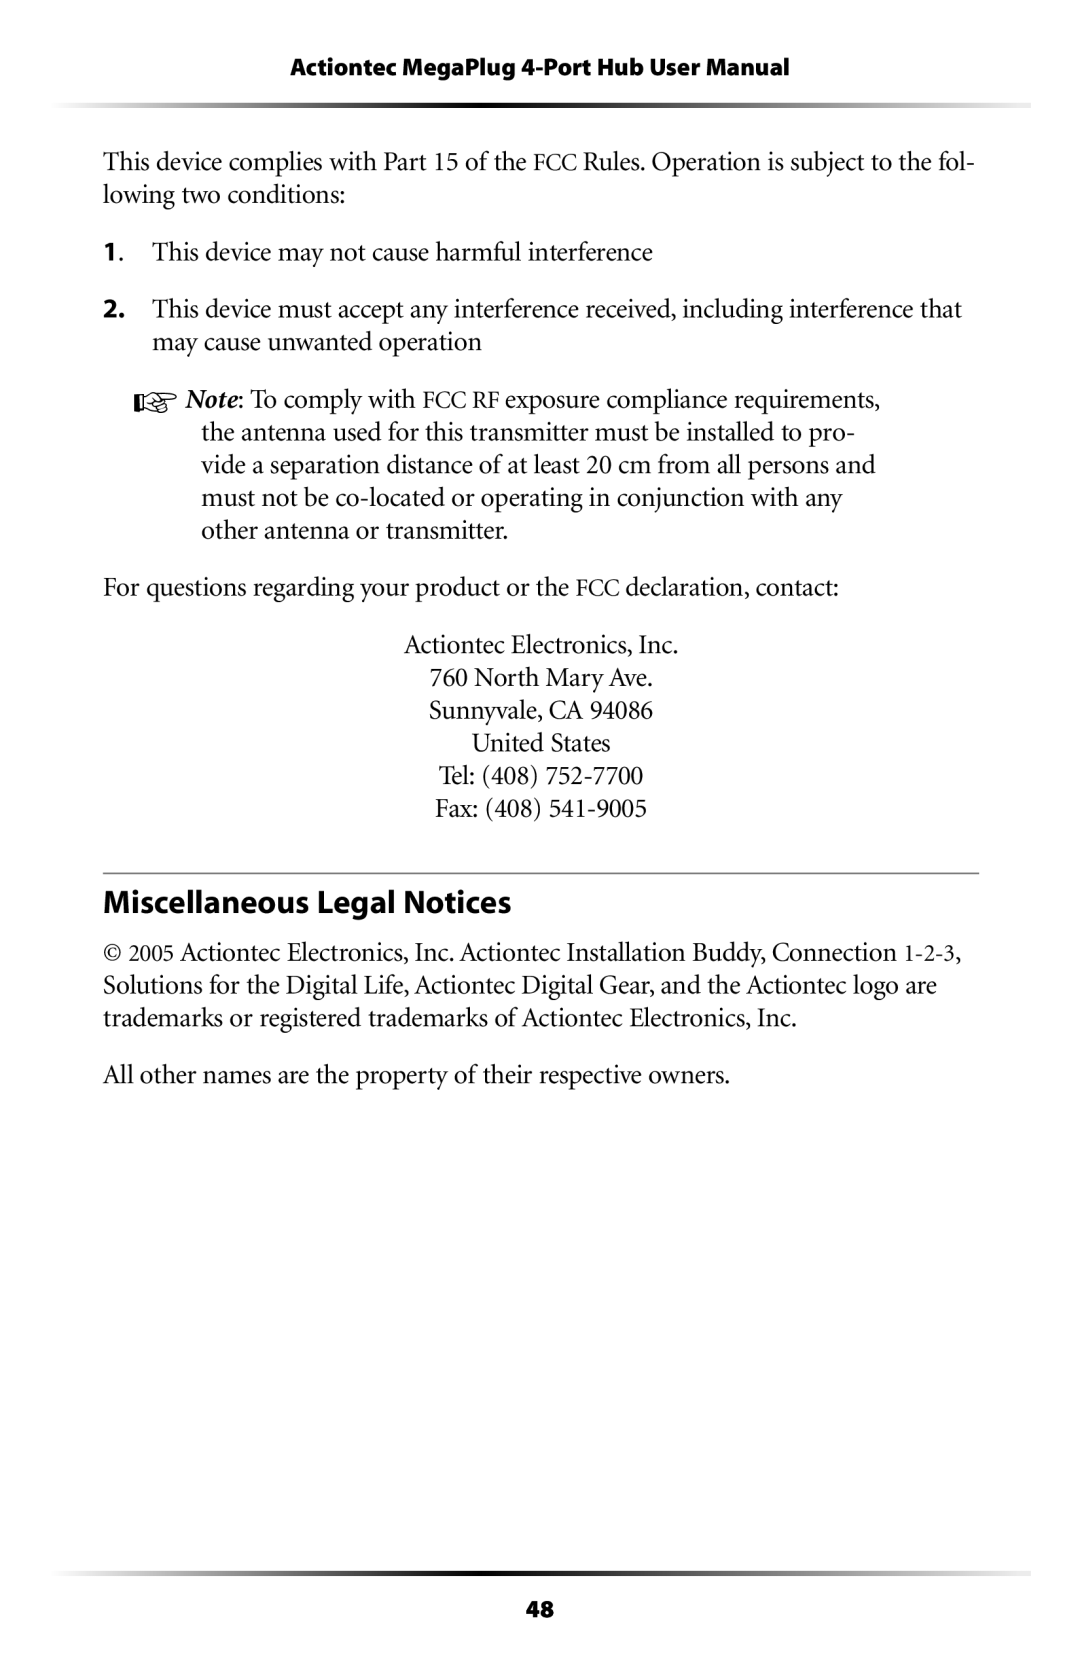 Actiontec electronic HPE400T user manual Miscellaneous Legal Notices 